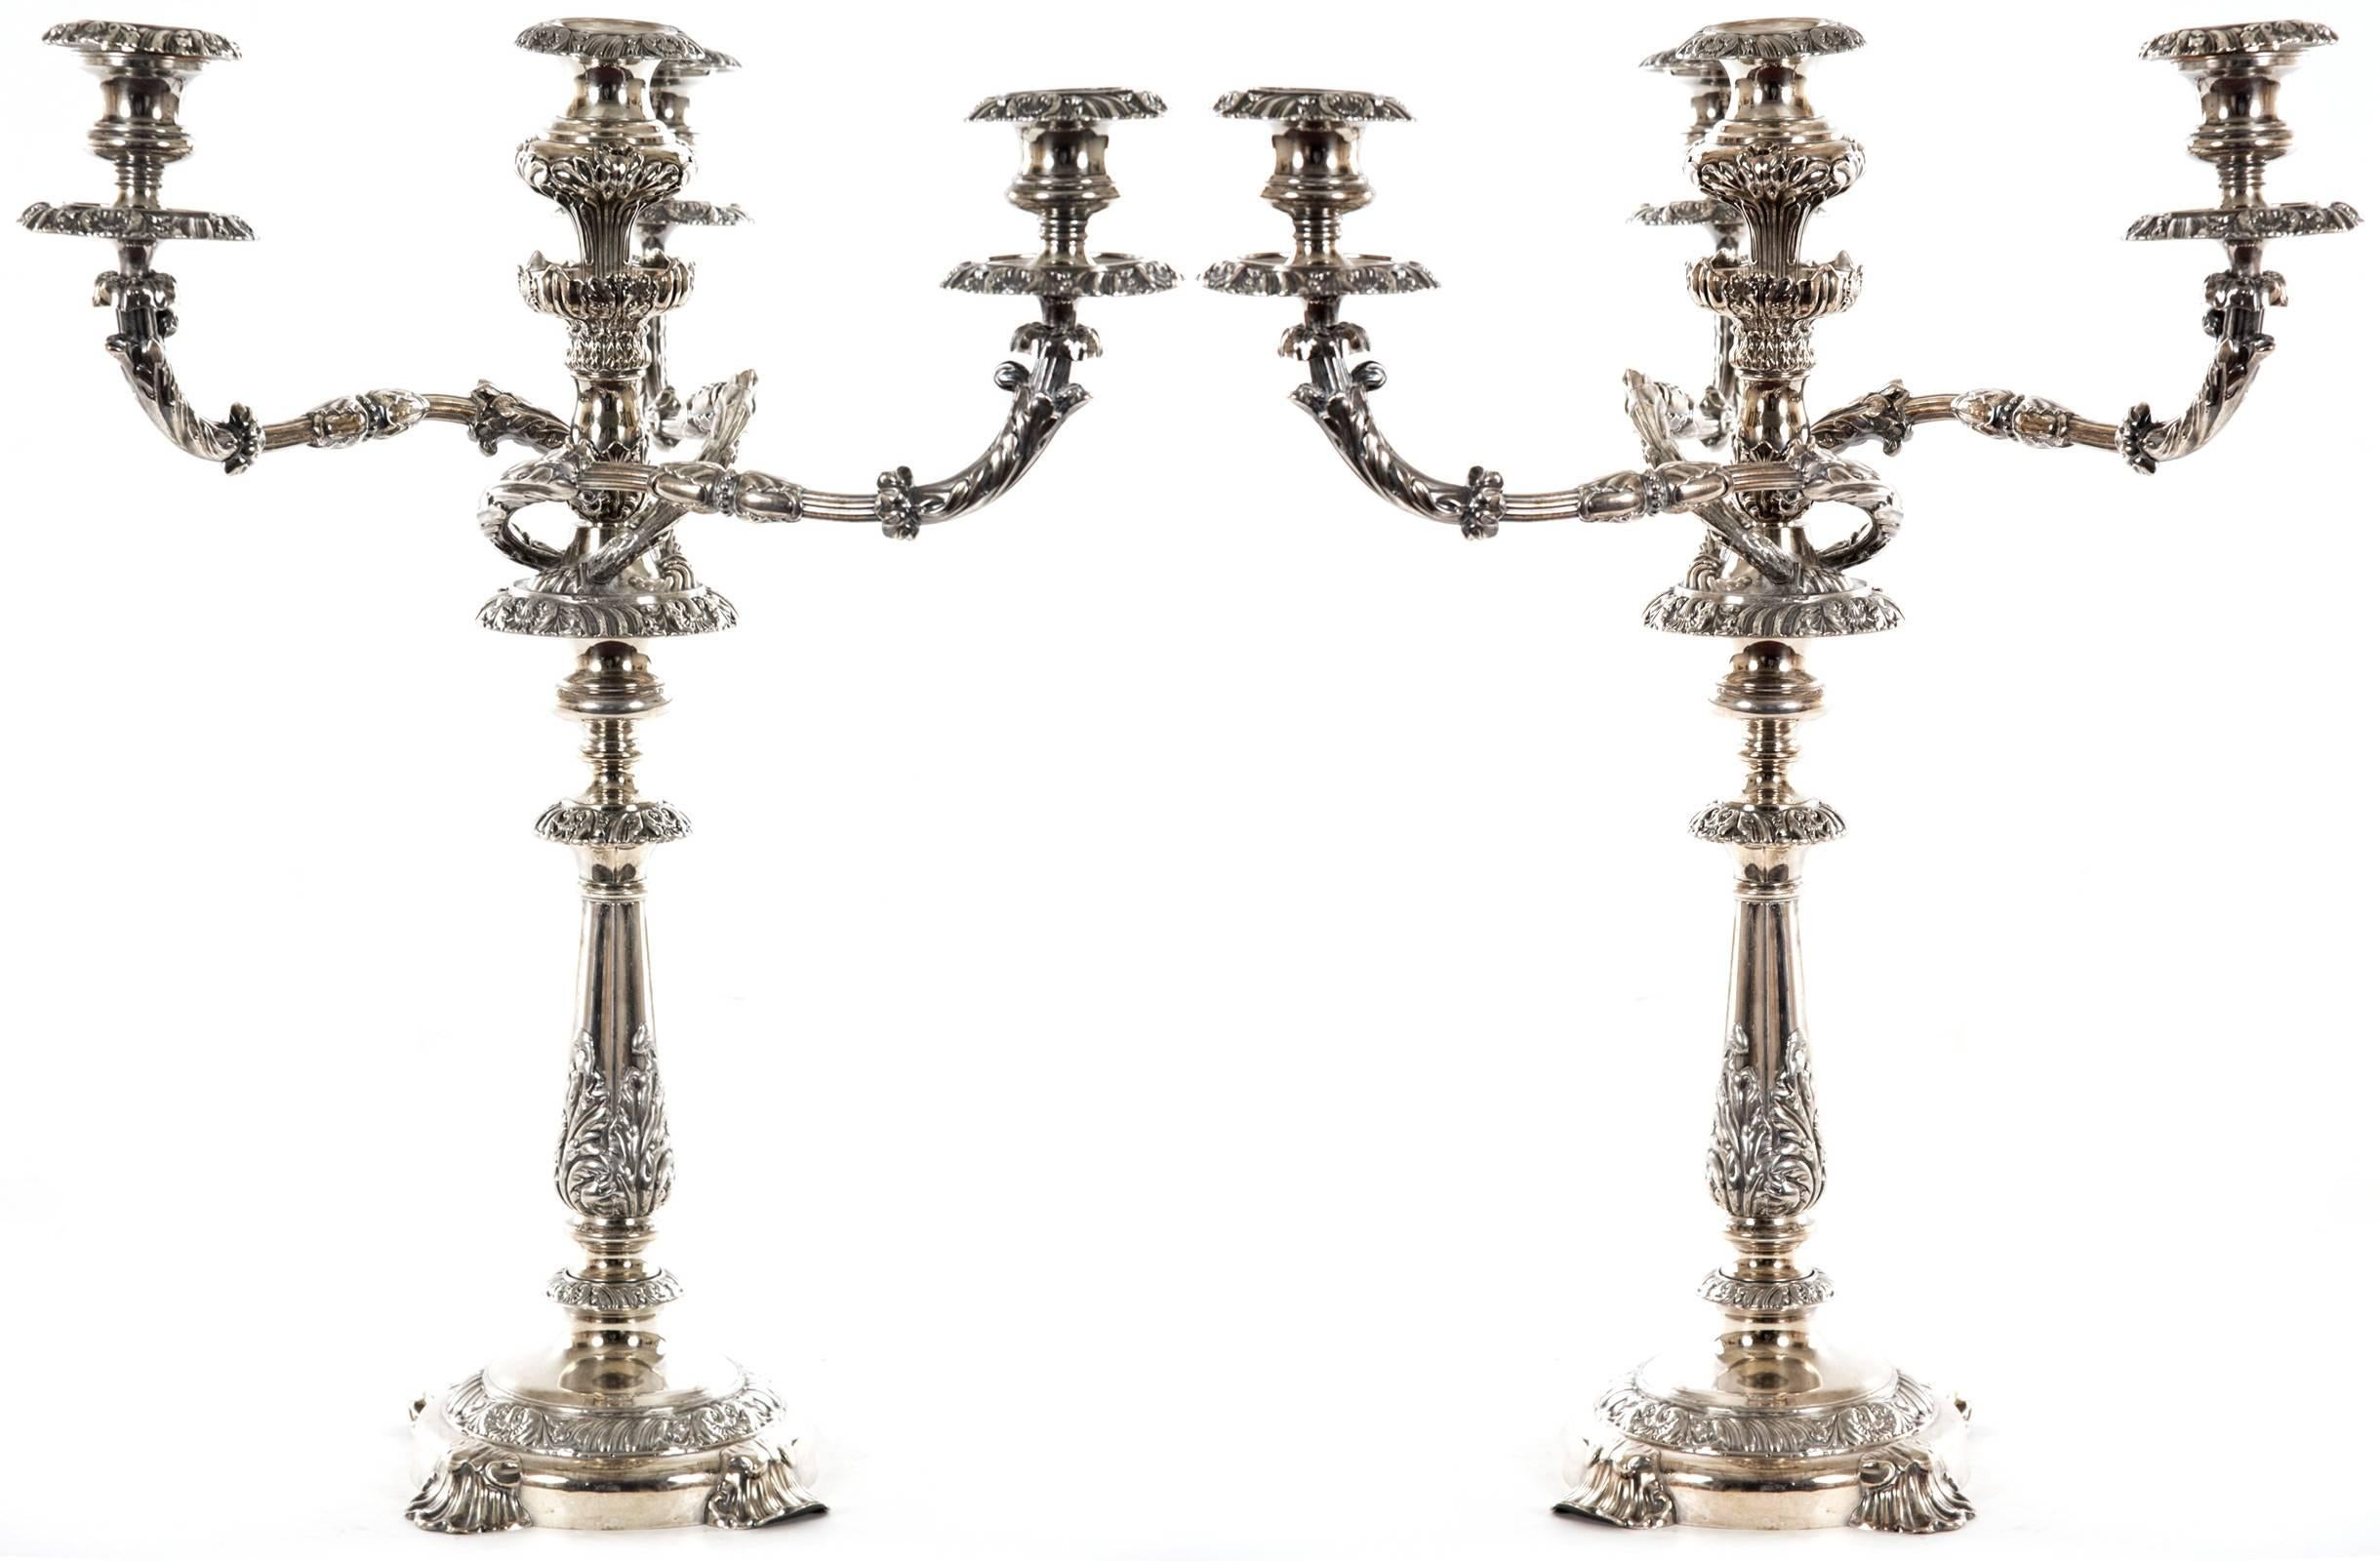 A pair of silver plated candelabra with three branches, as well as a sconce atop the centre stem, embossed with scrolling leaf and foliate decoration, supported on a round base with four applied foliate feet.